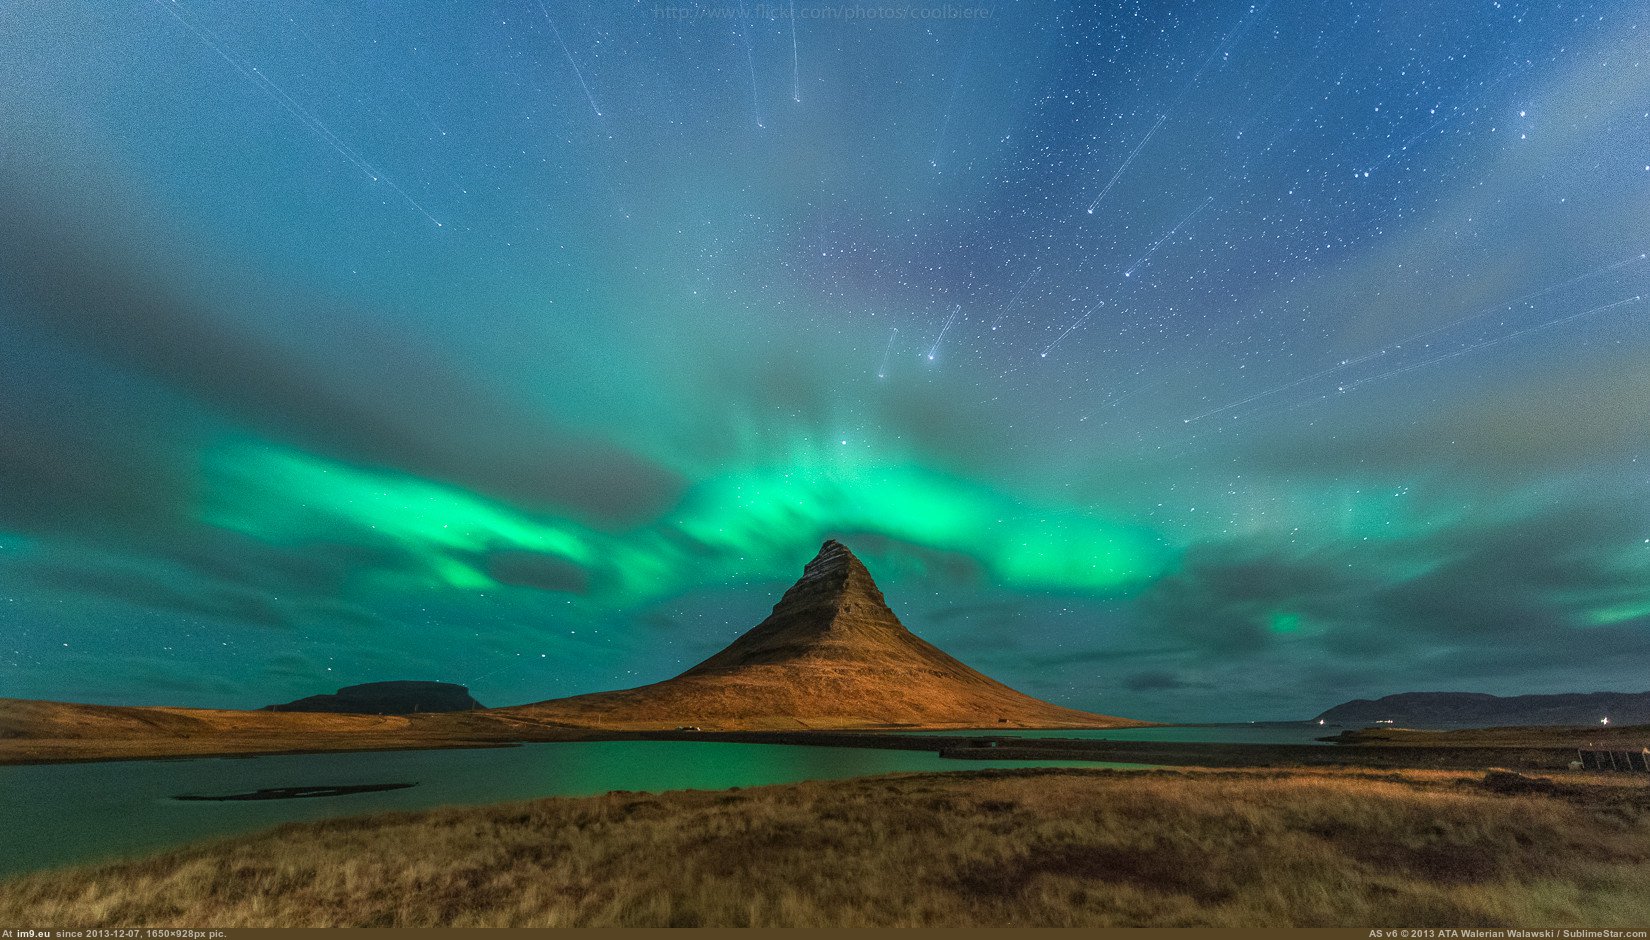 [Pics] Starburst over Aurora Borealis in Iceland (in My r/PICS favs)